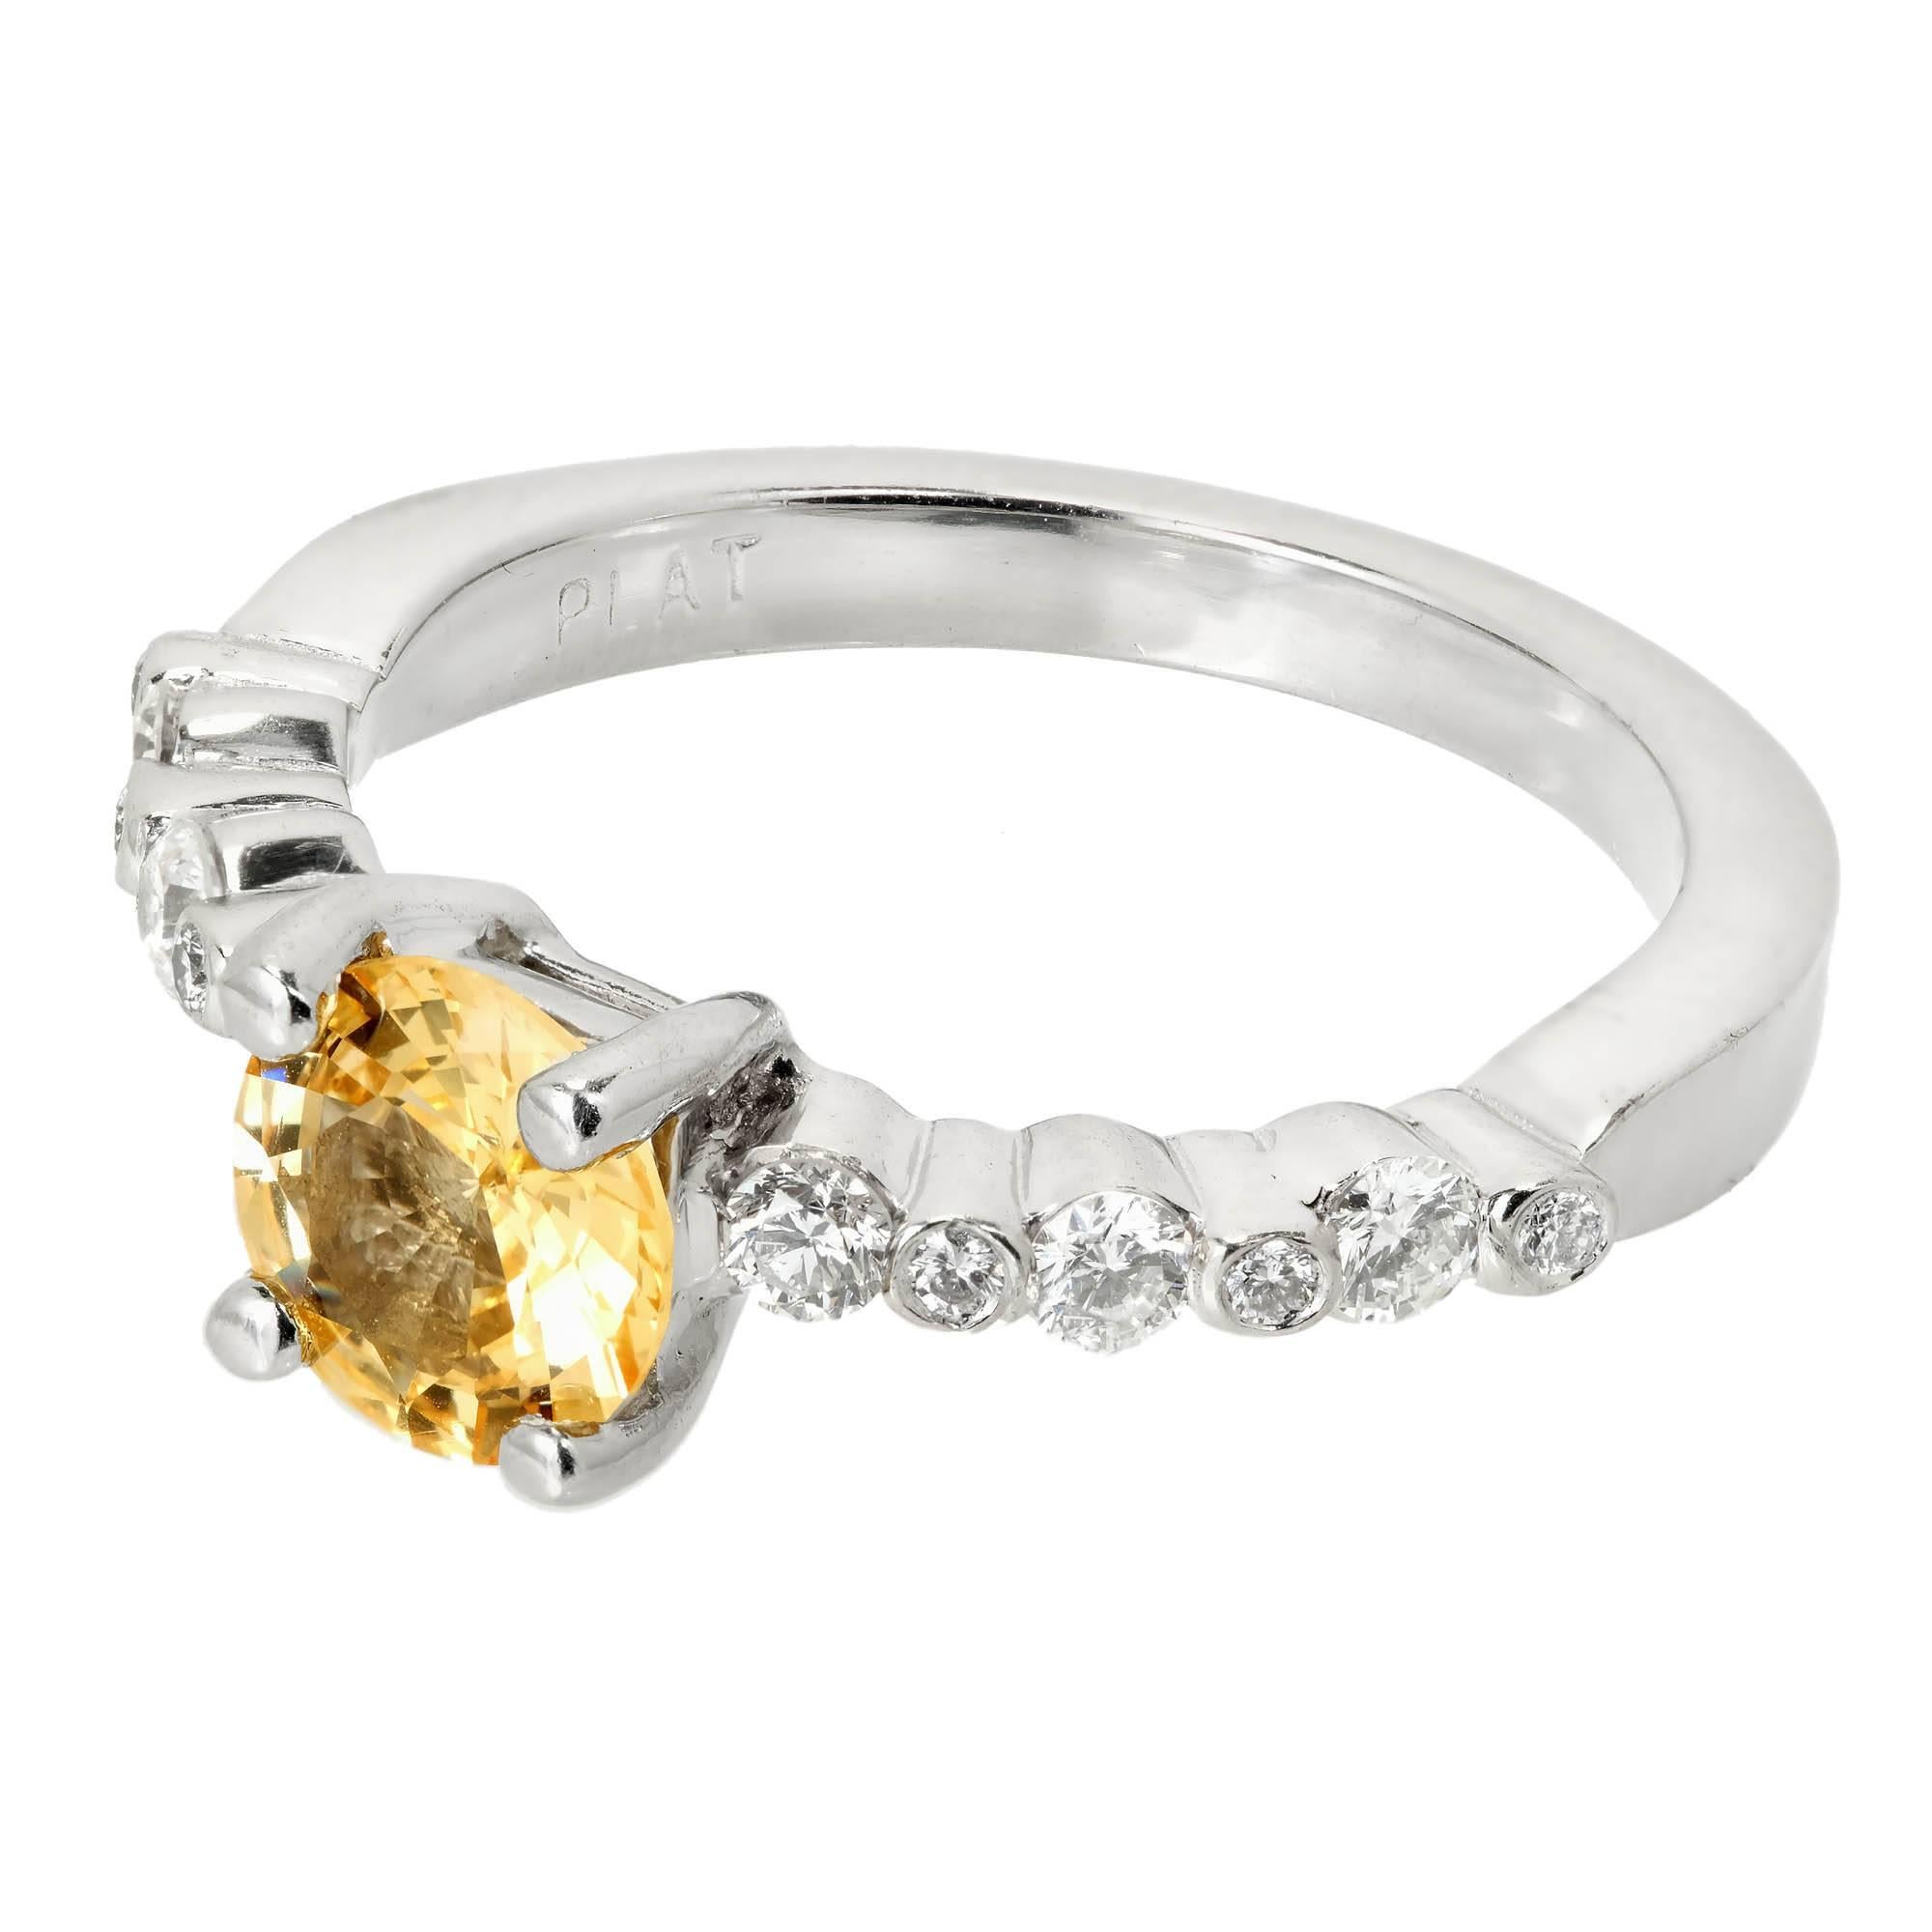 Natural custom cut round yellow Sapphire engagement ring with round cut diamond accents in a solid Platinum setting.  

1 modified brilliant cut natural fancy yellow round Sapphire, approx. total weight 1.05cts, VS, 6.48 x 6.54 x 3.24mm, natural no